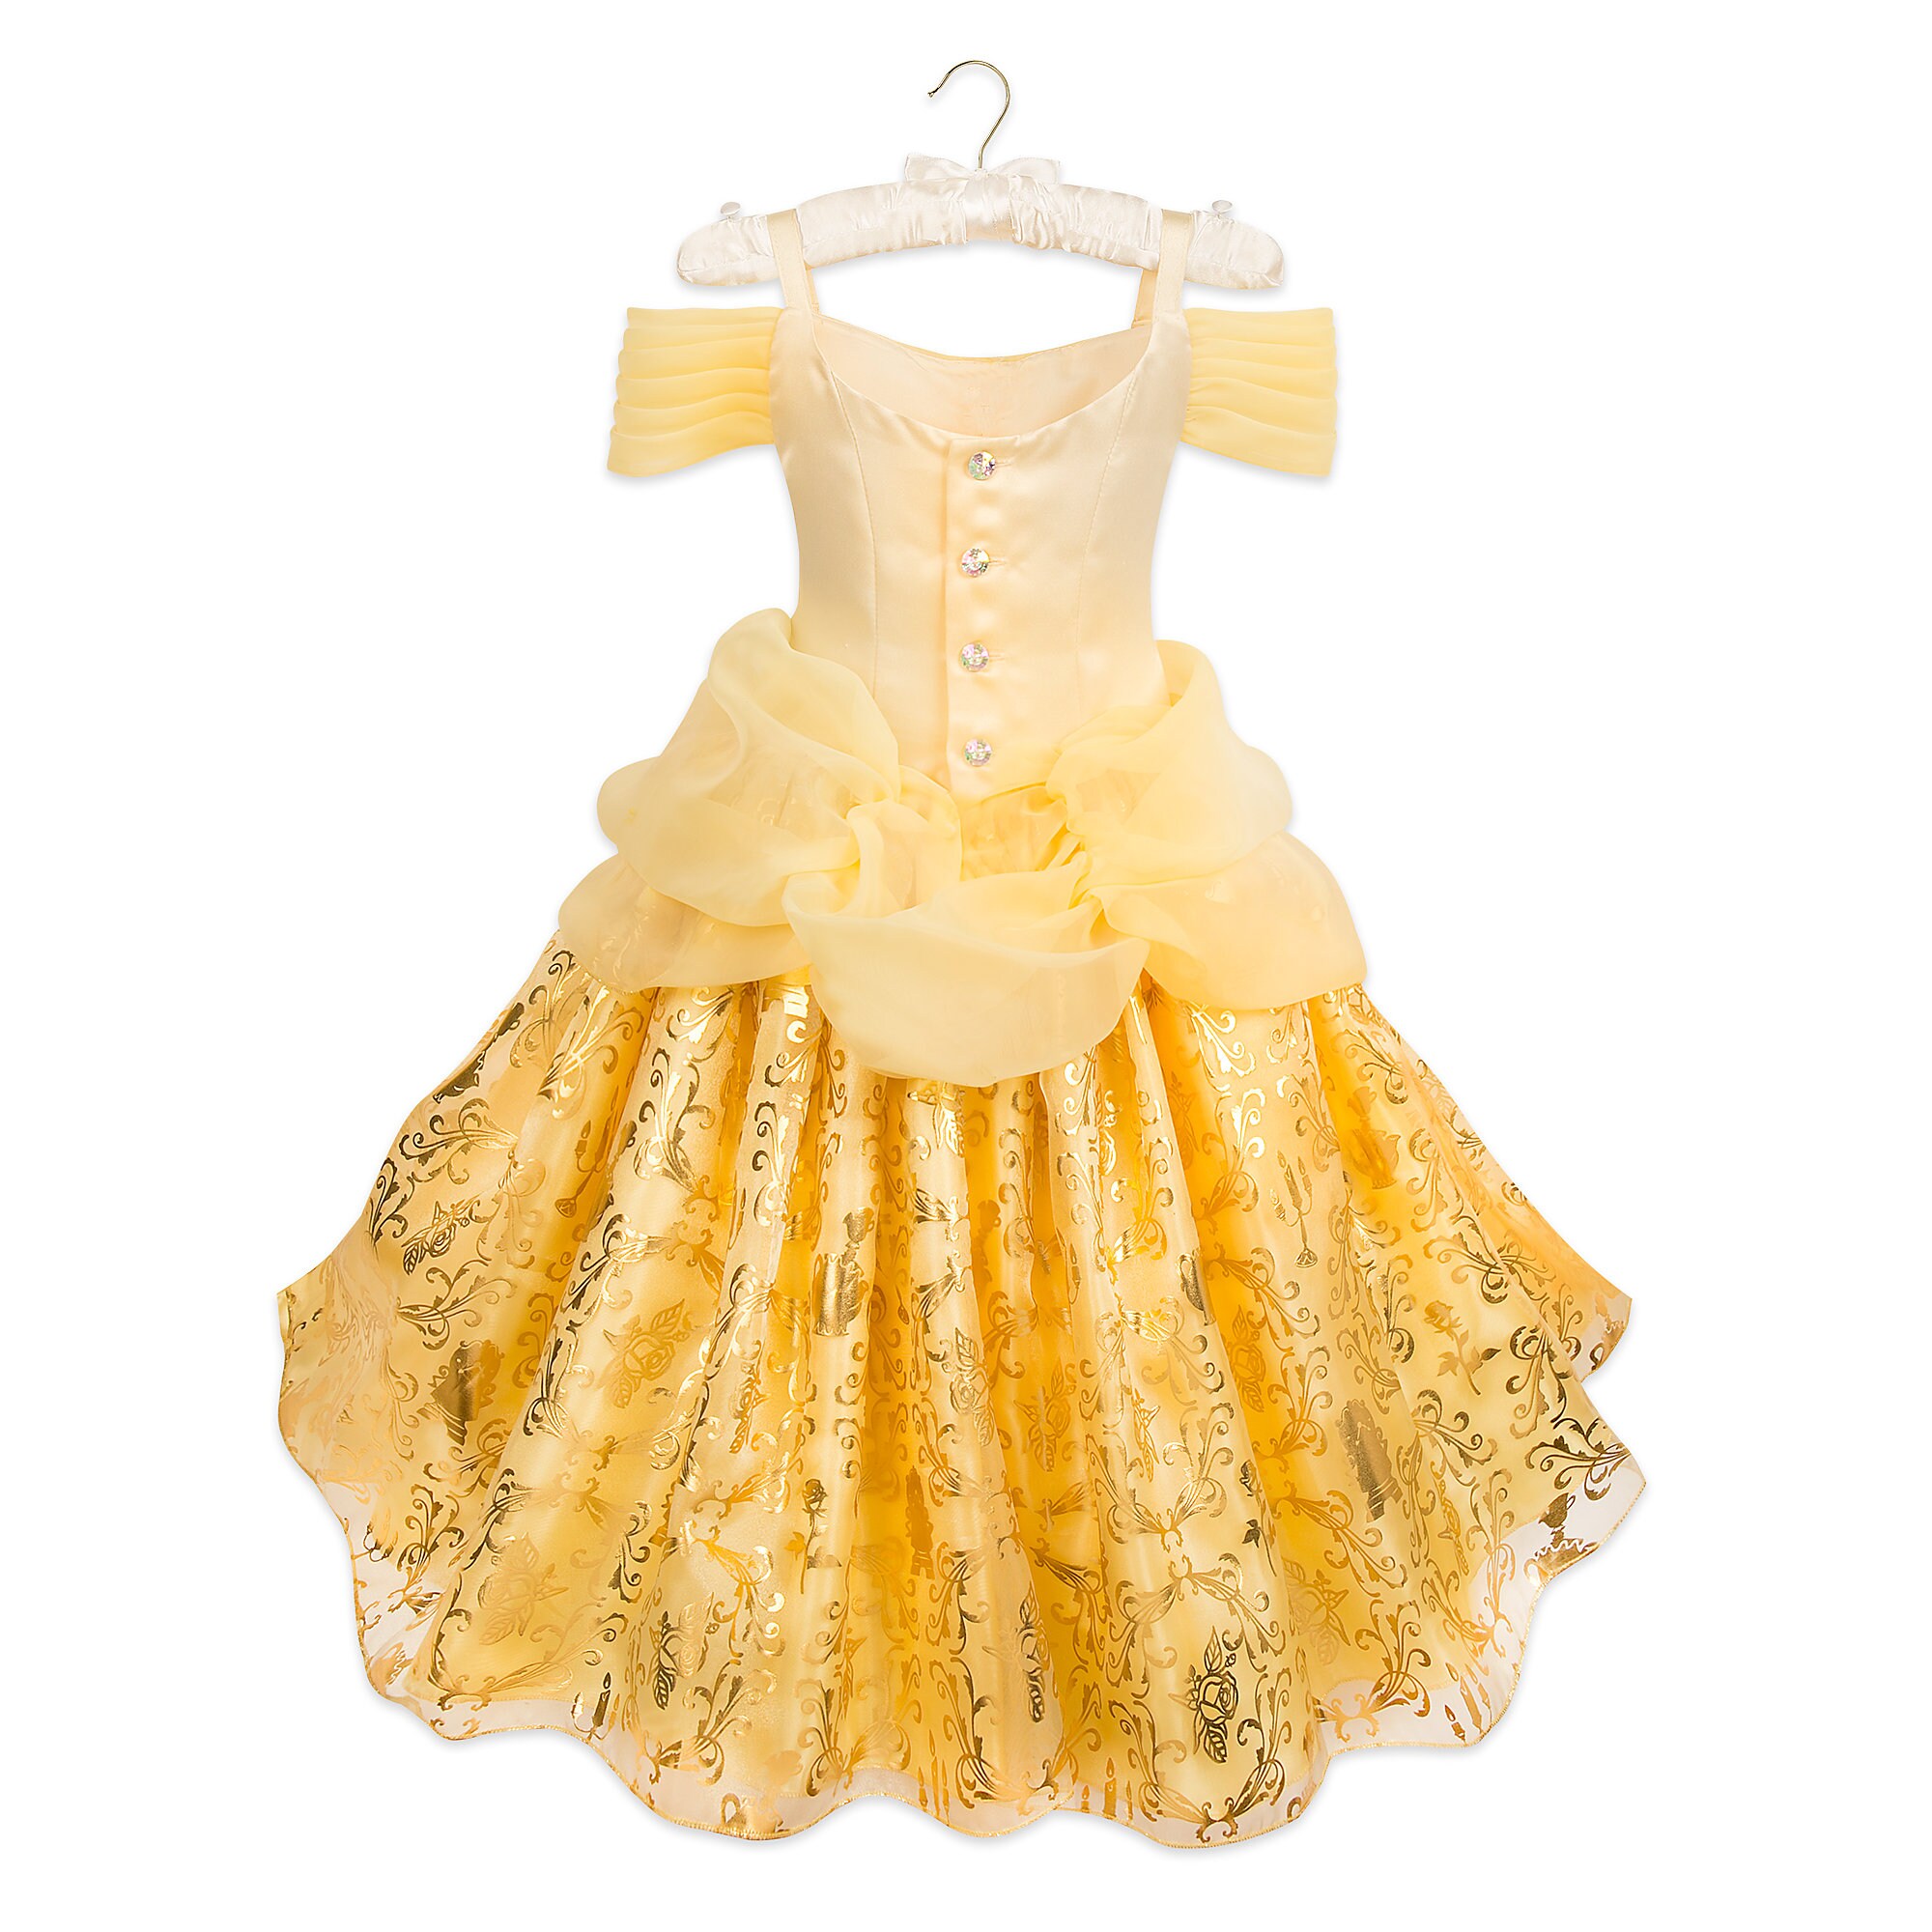 Belle Deluxe Costume for Kids - Beauty and the Beast